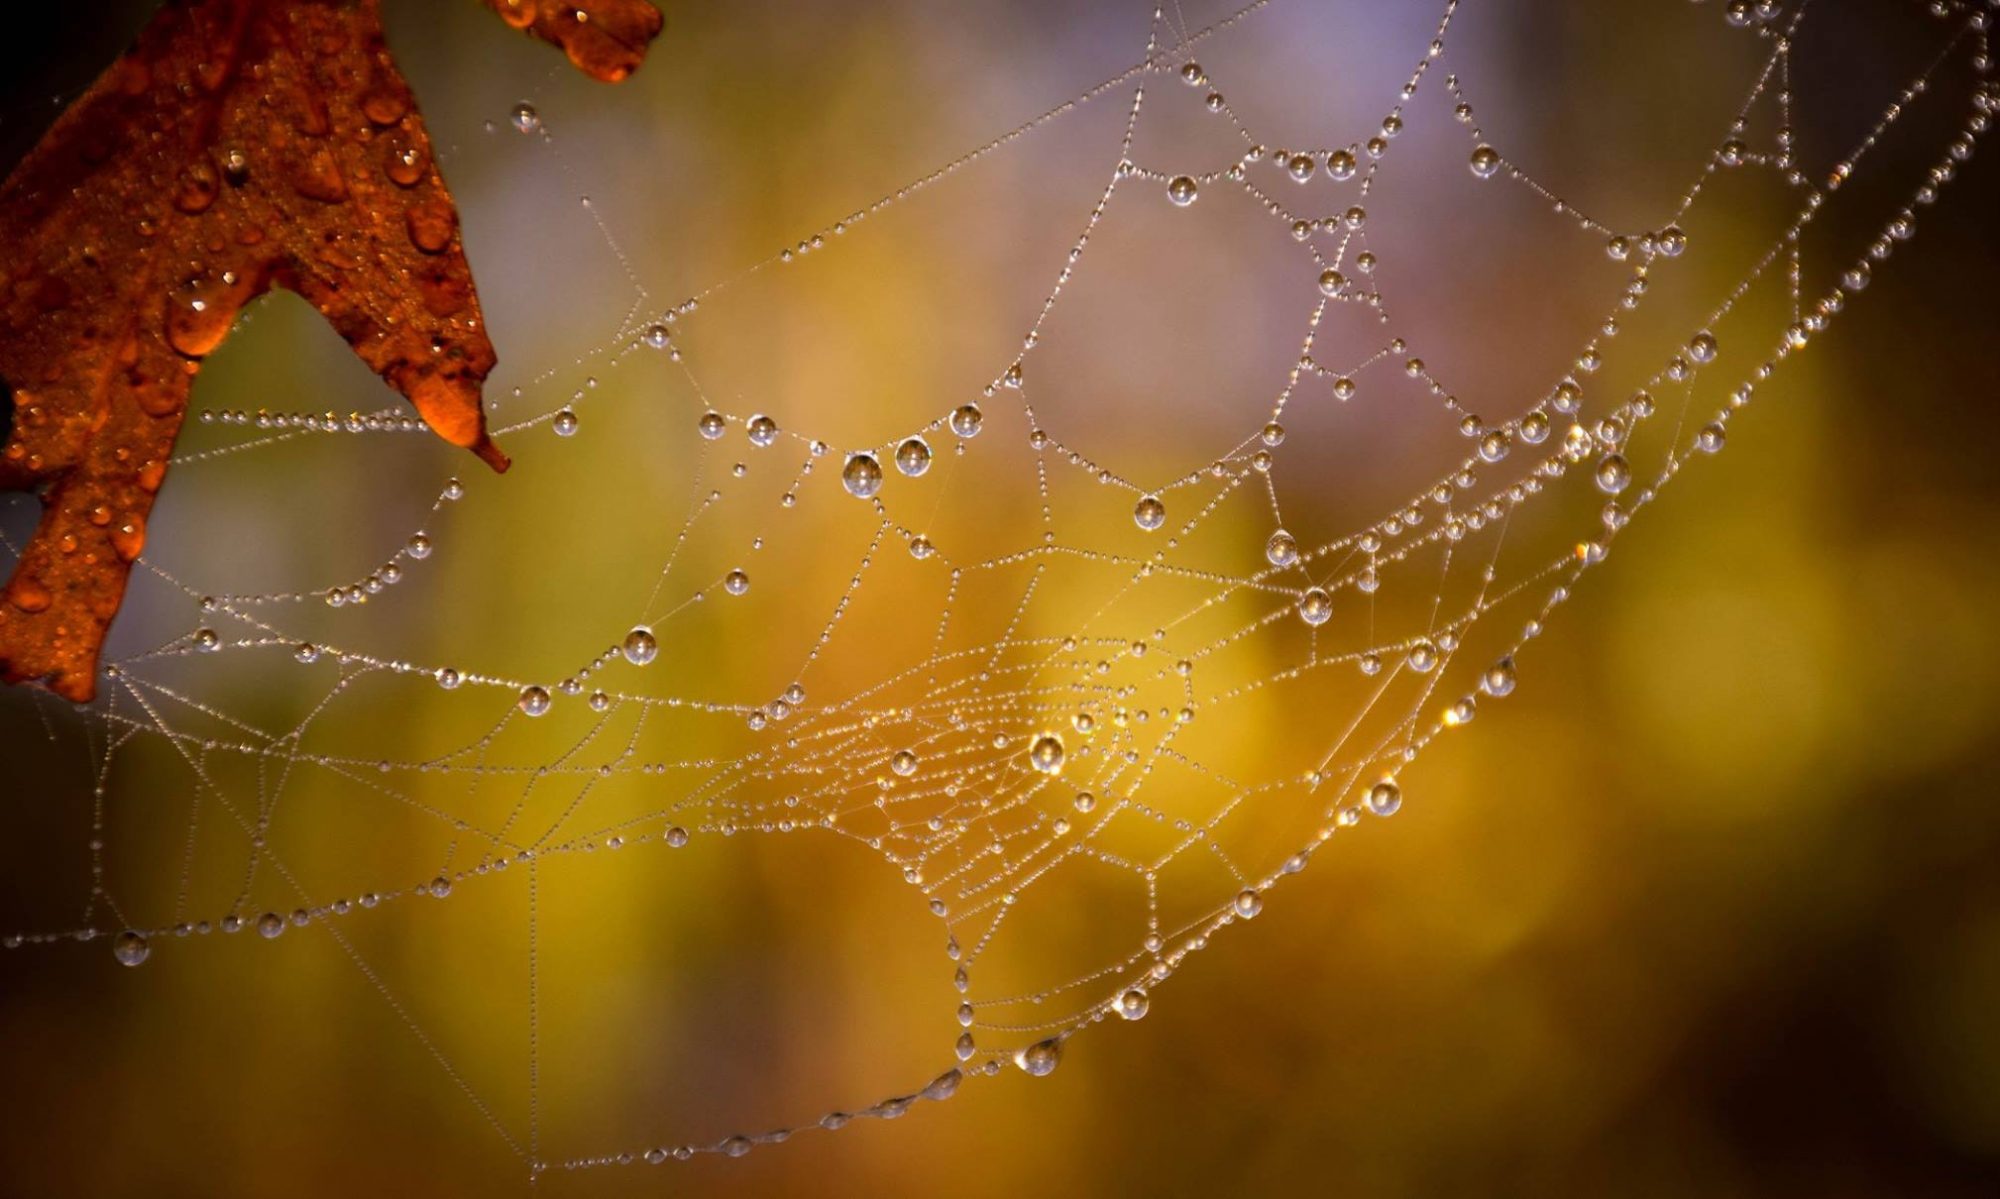 spider's web with droplets of dew